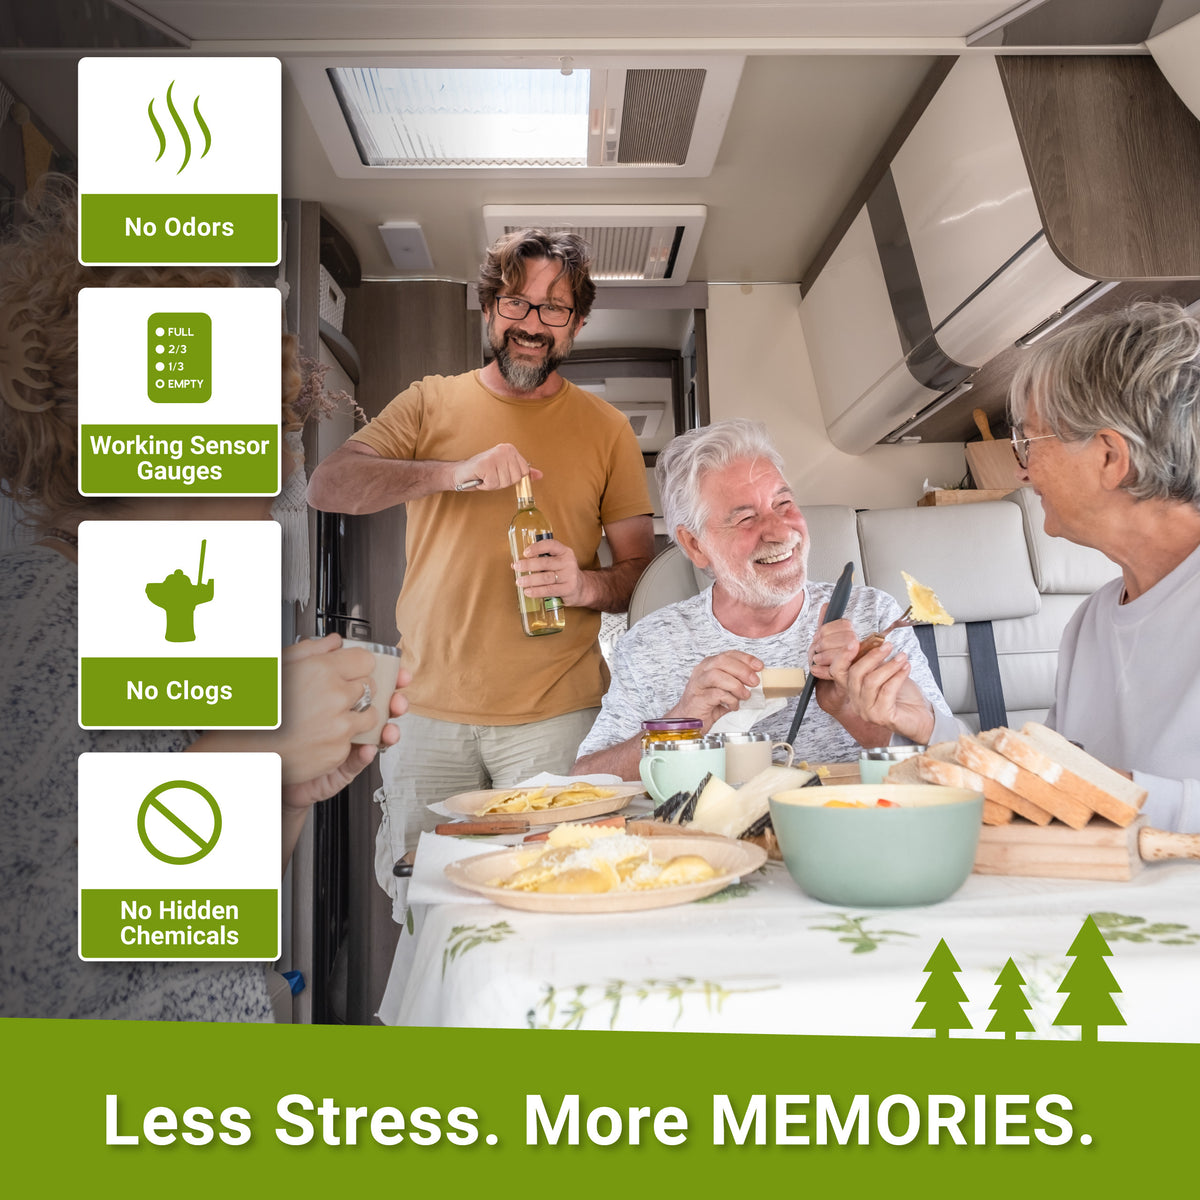 Less stress. More memories. RV Digest-It Eliminates odors, maintains working sensors, no clogs, no hidden chemicals.